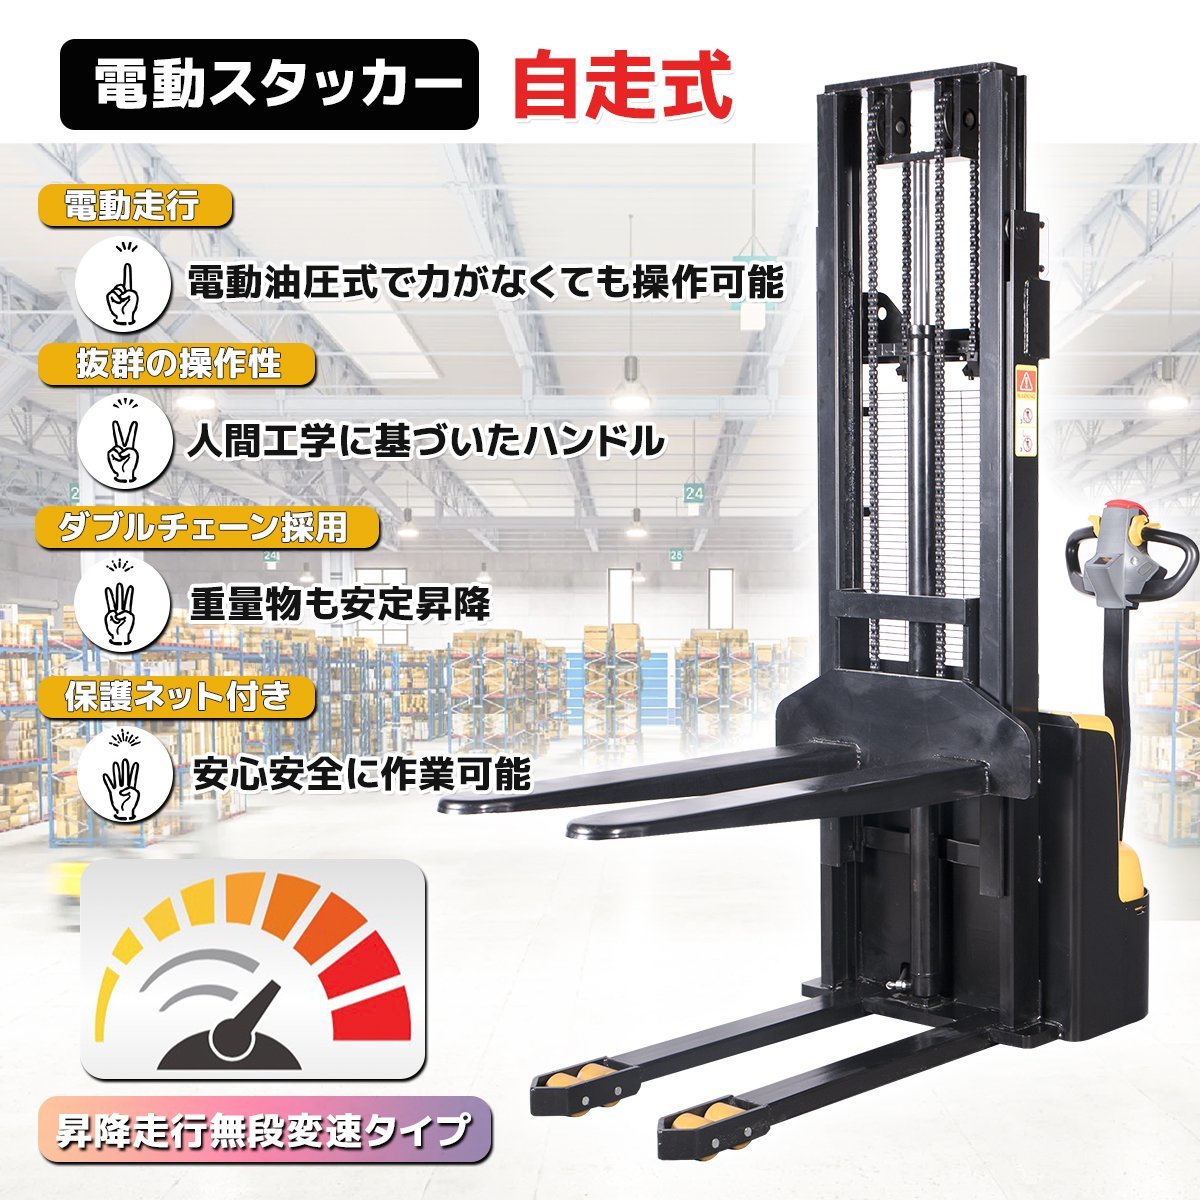 *2 car limitation * animation attaching electric forklift s Tucker self-propelled electric elevator maximum loading 1500kg highest rank 3m Fork overall width remote control key attaching * one year guaranteed 